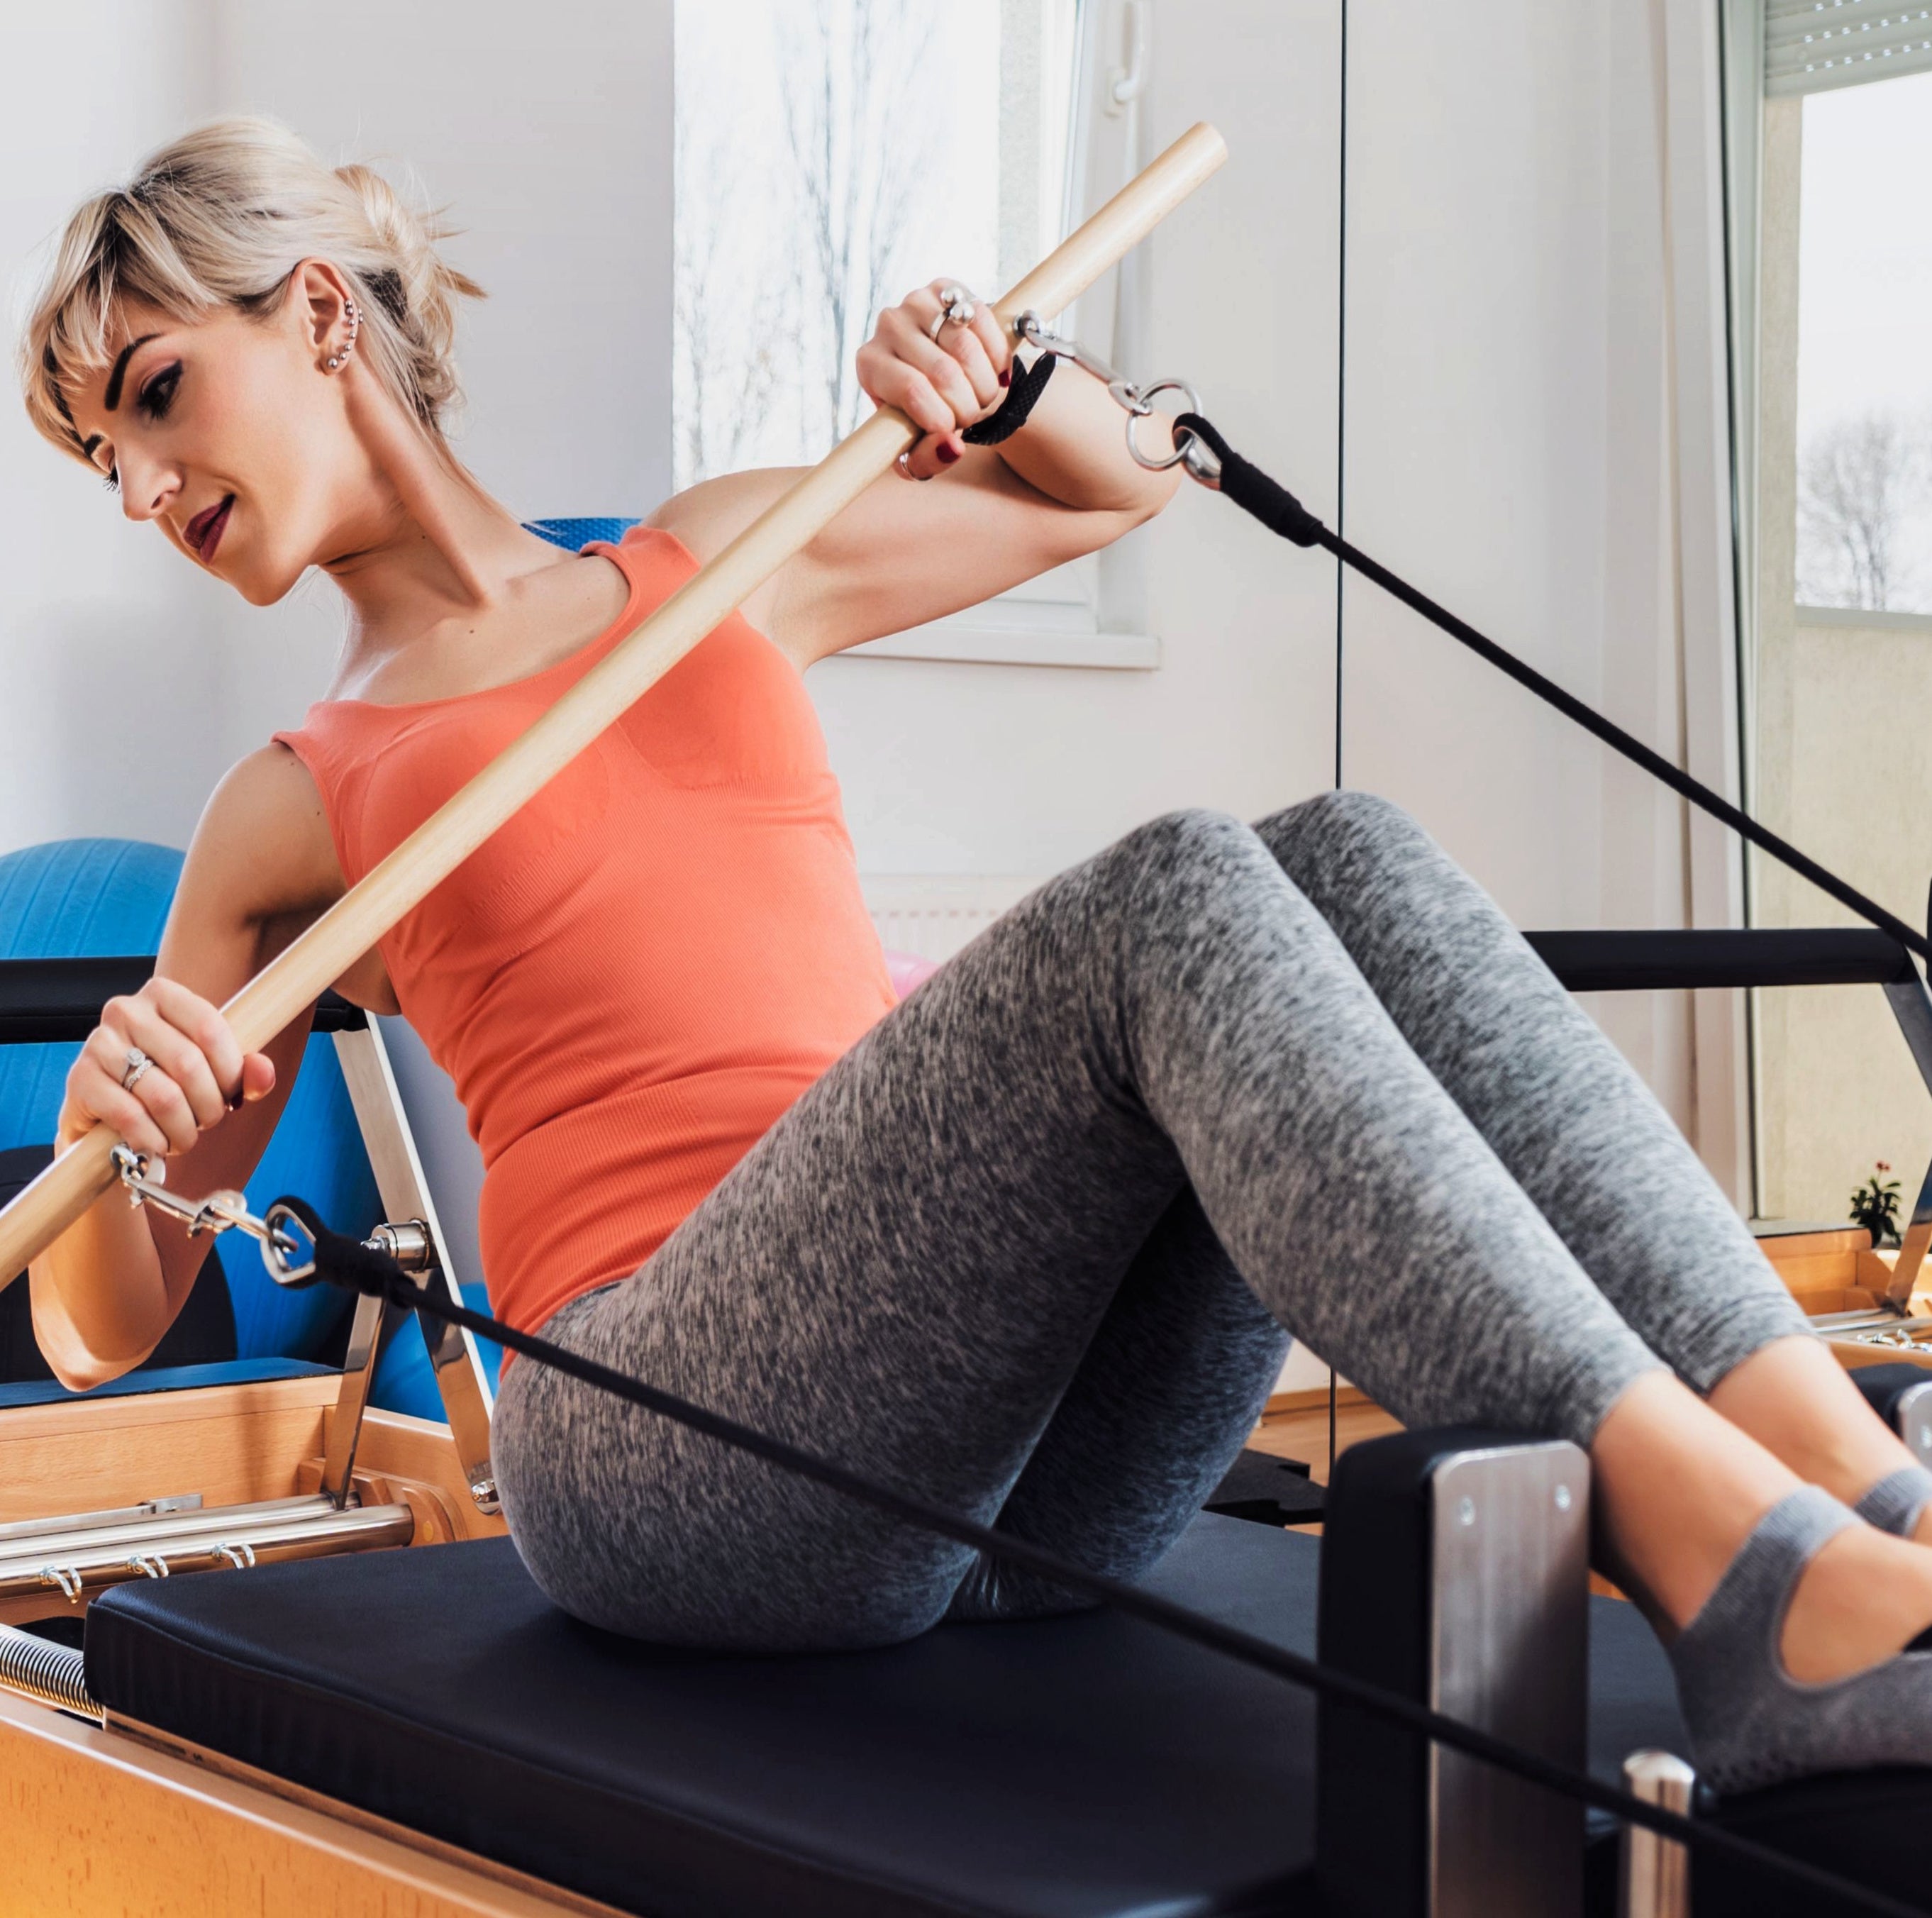 What Should You Wear to Work Out on a Pilates Reformer? – Pilates